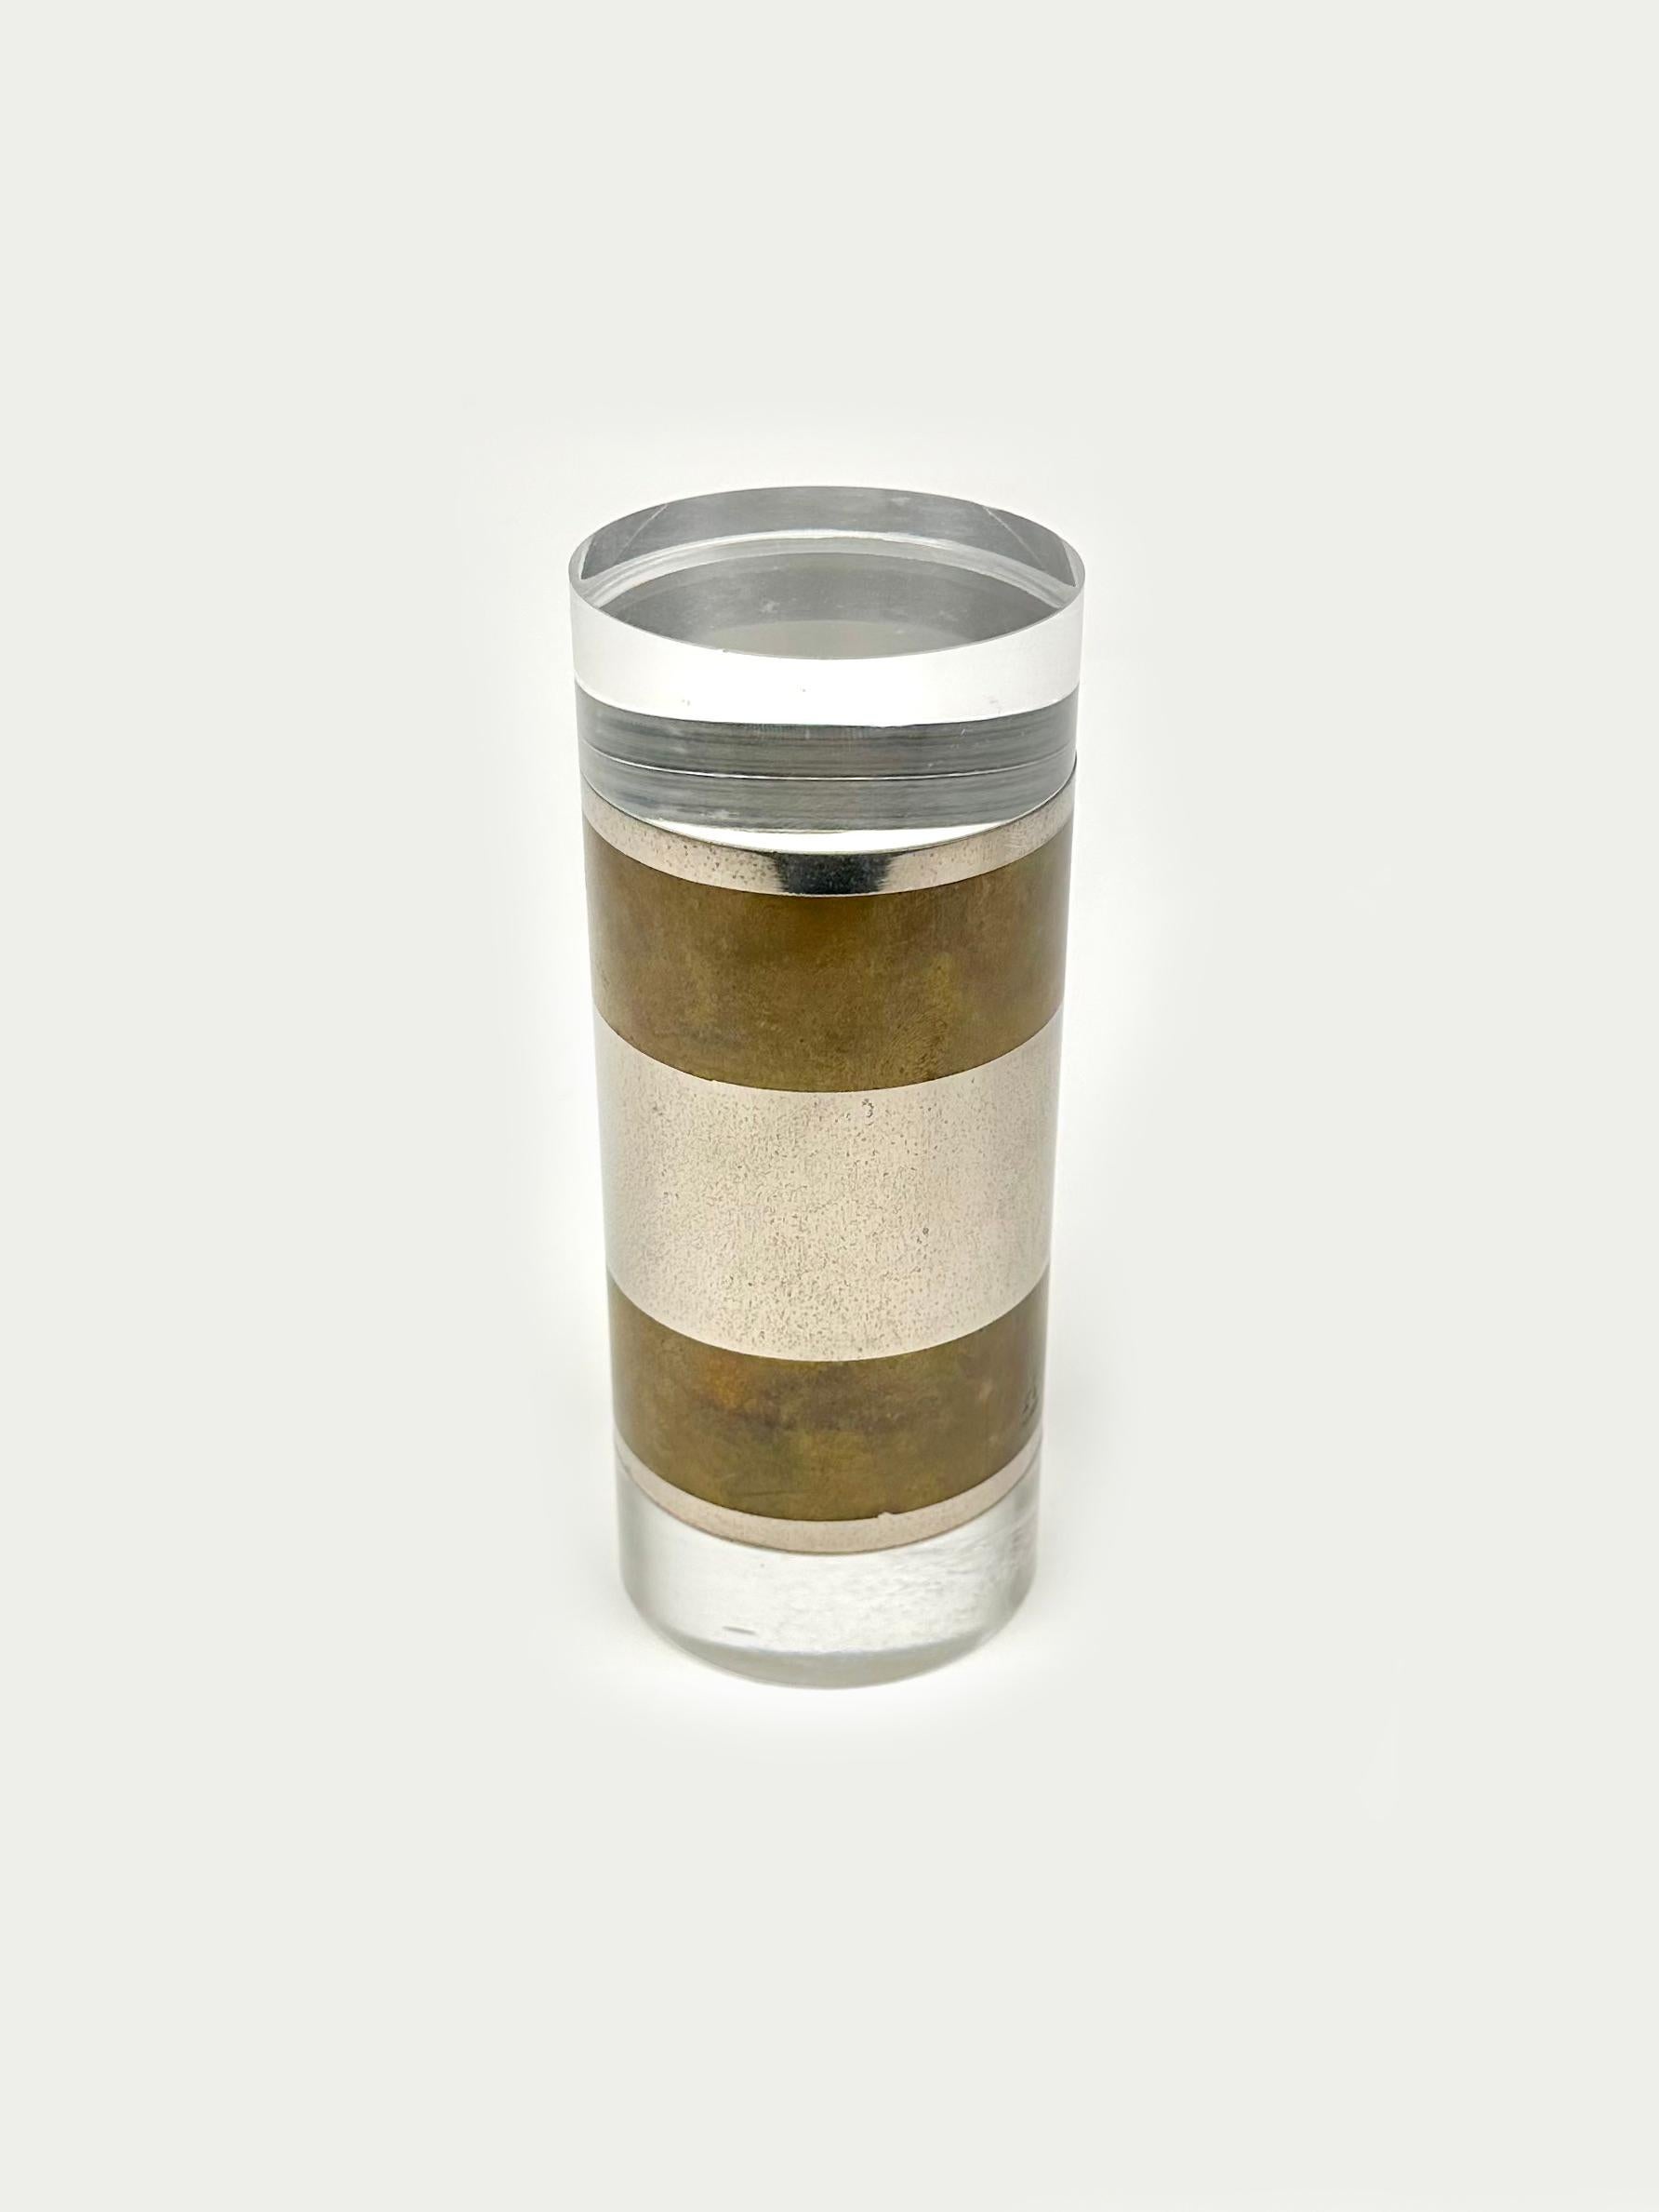 Pair of Cylindrical Box in Chrome, Brass and Lucite by Romeo Rega, Italy 1970s For Sale 4